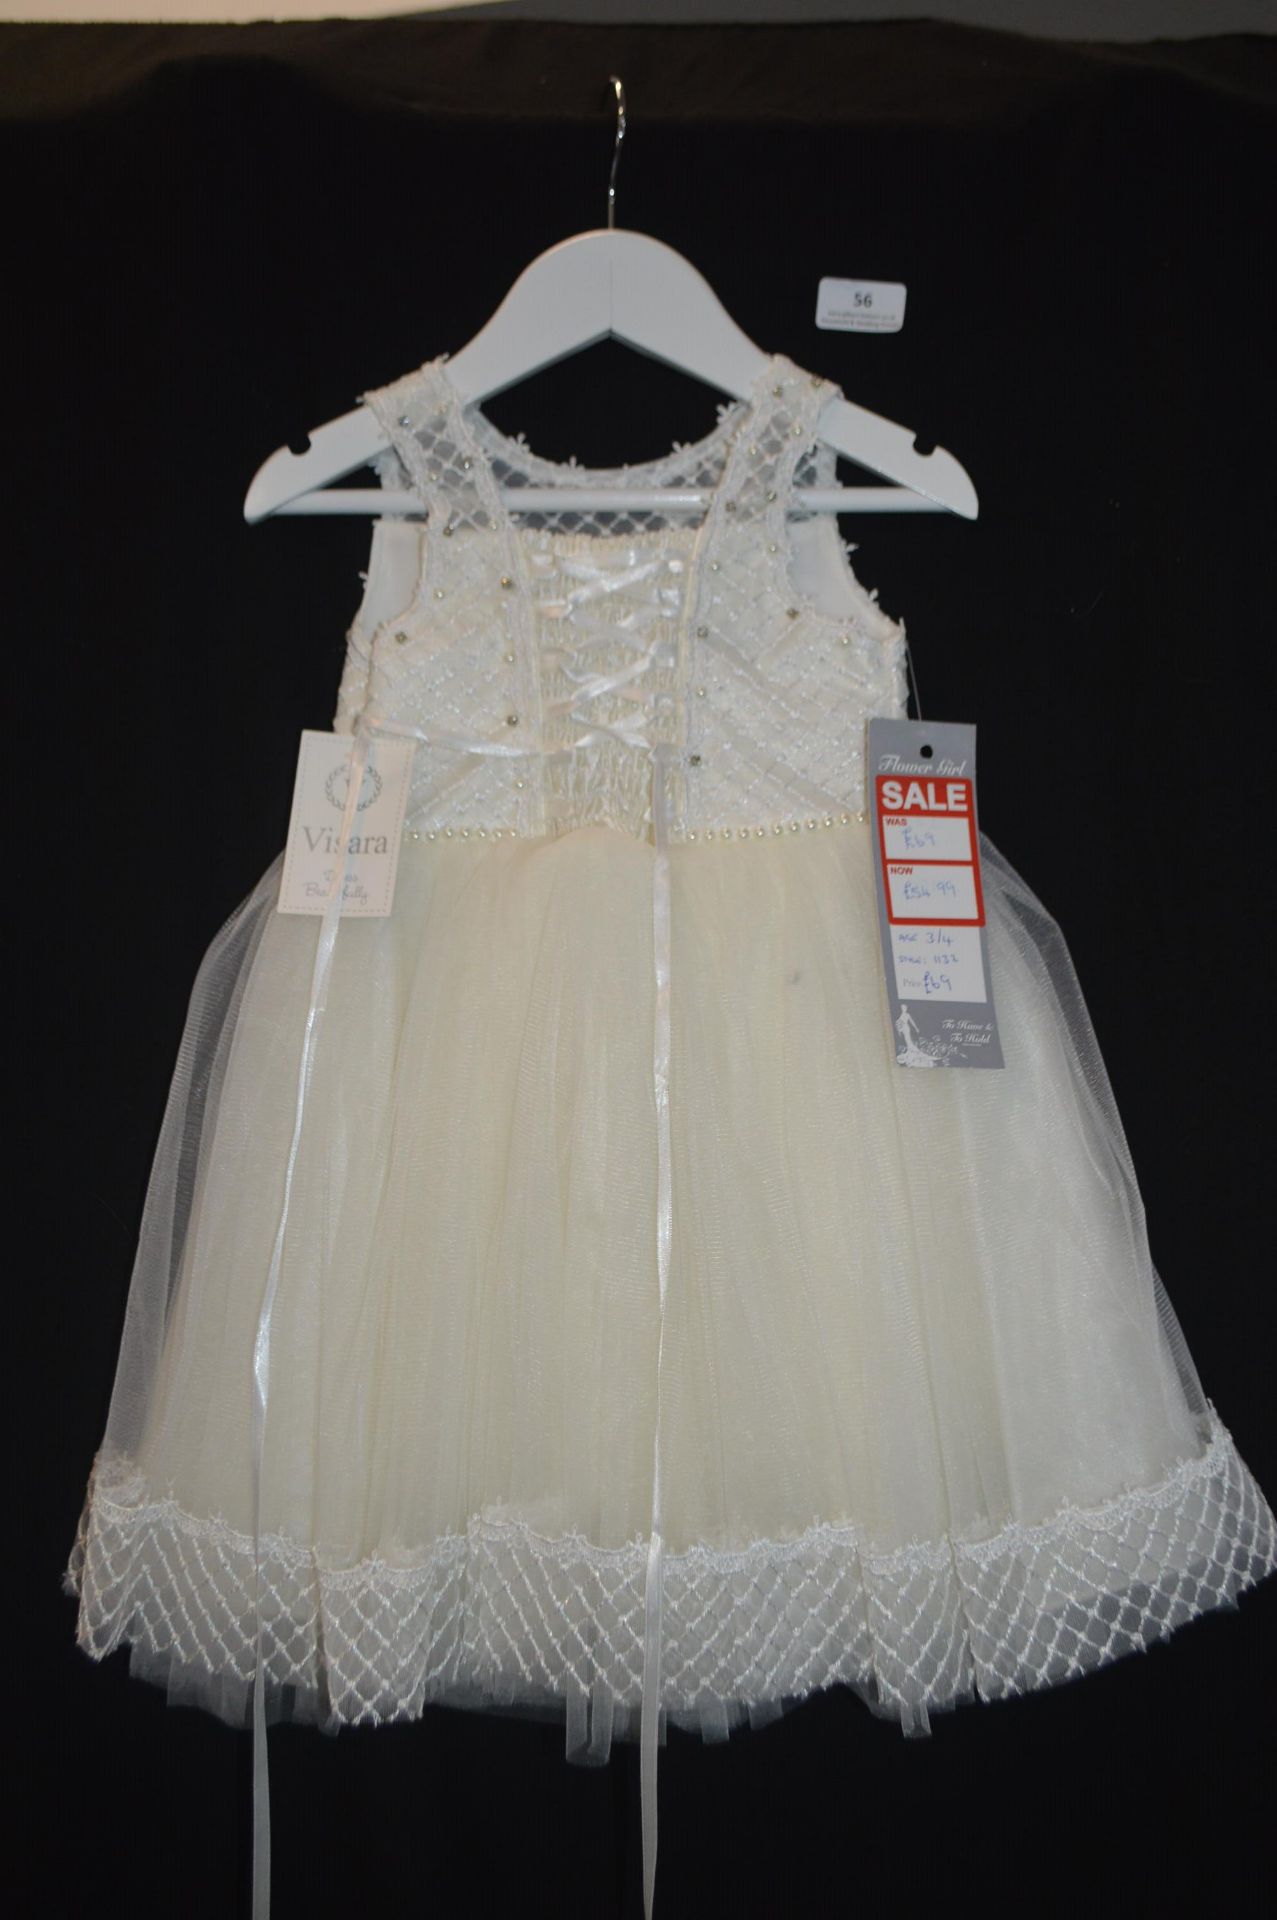 Girl's Bridesmaid Dress in Ivory by Visara Size: 3-4 years - Image 2 of 2